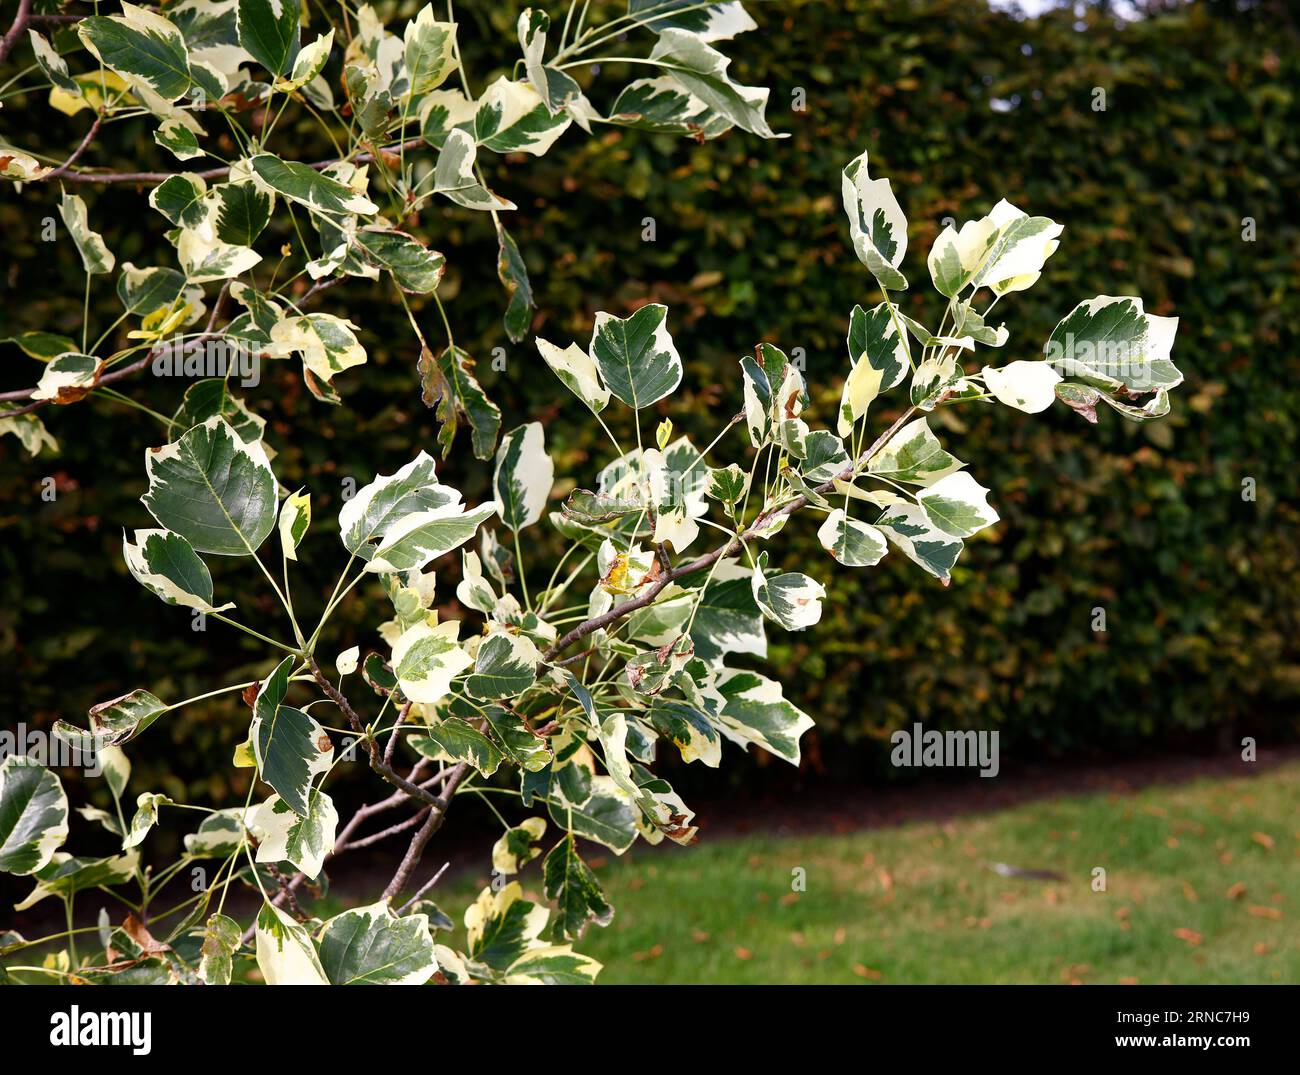 Closeup of the cream and green variegated leaves of the tall growing garden tree liriodendron tulipifera snowbird or Tulip tree. Stock Photo